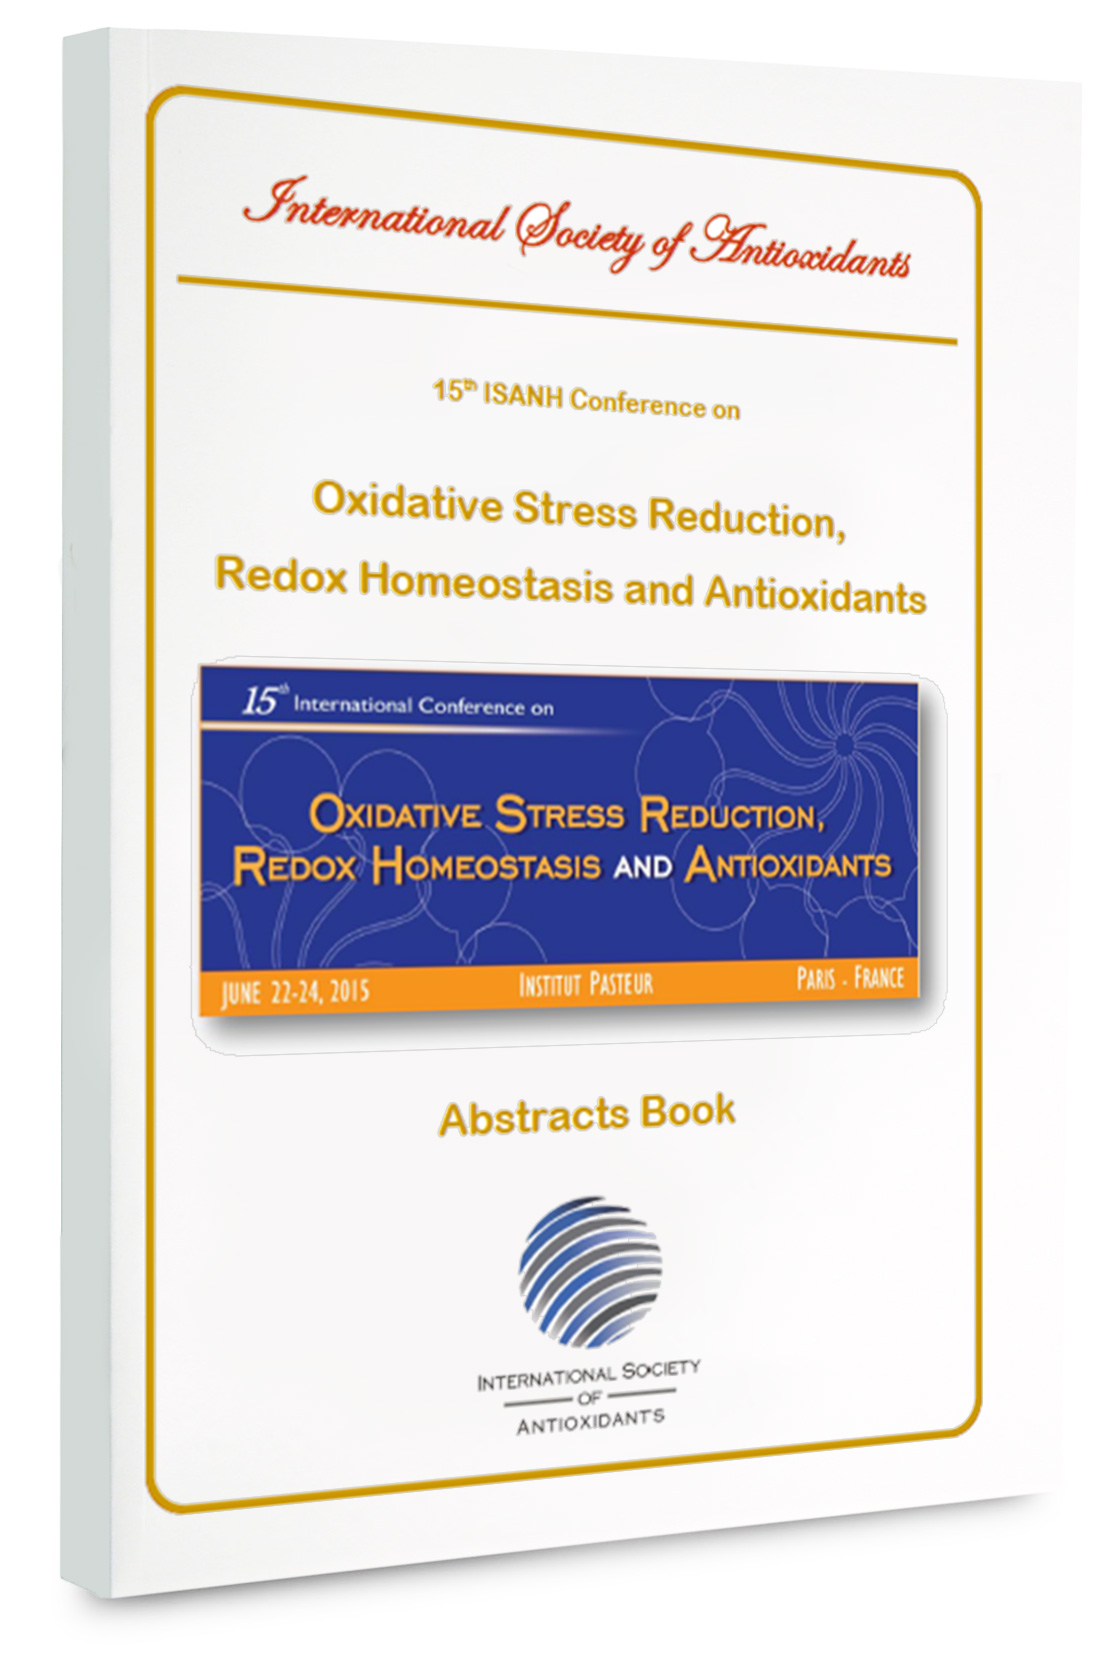 Paris Redox abstracts book 2015 is Available now